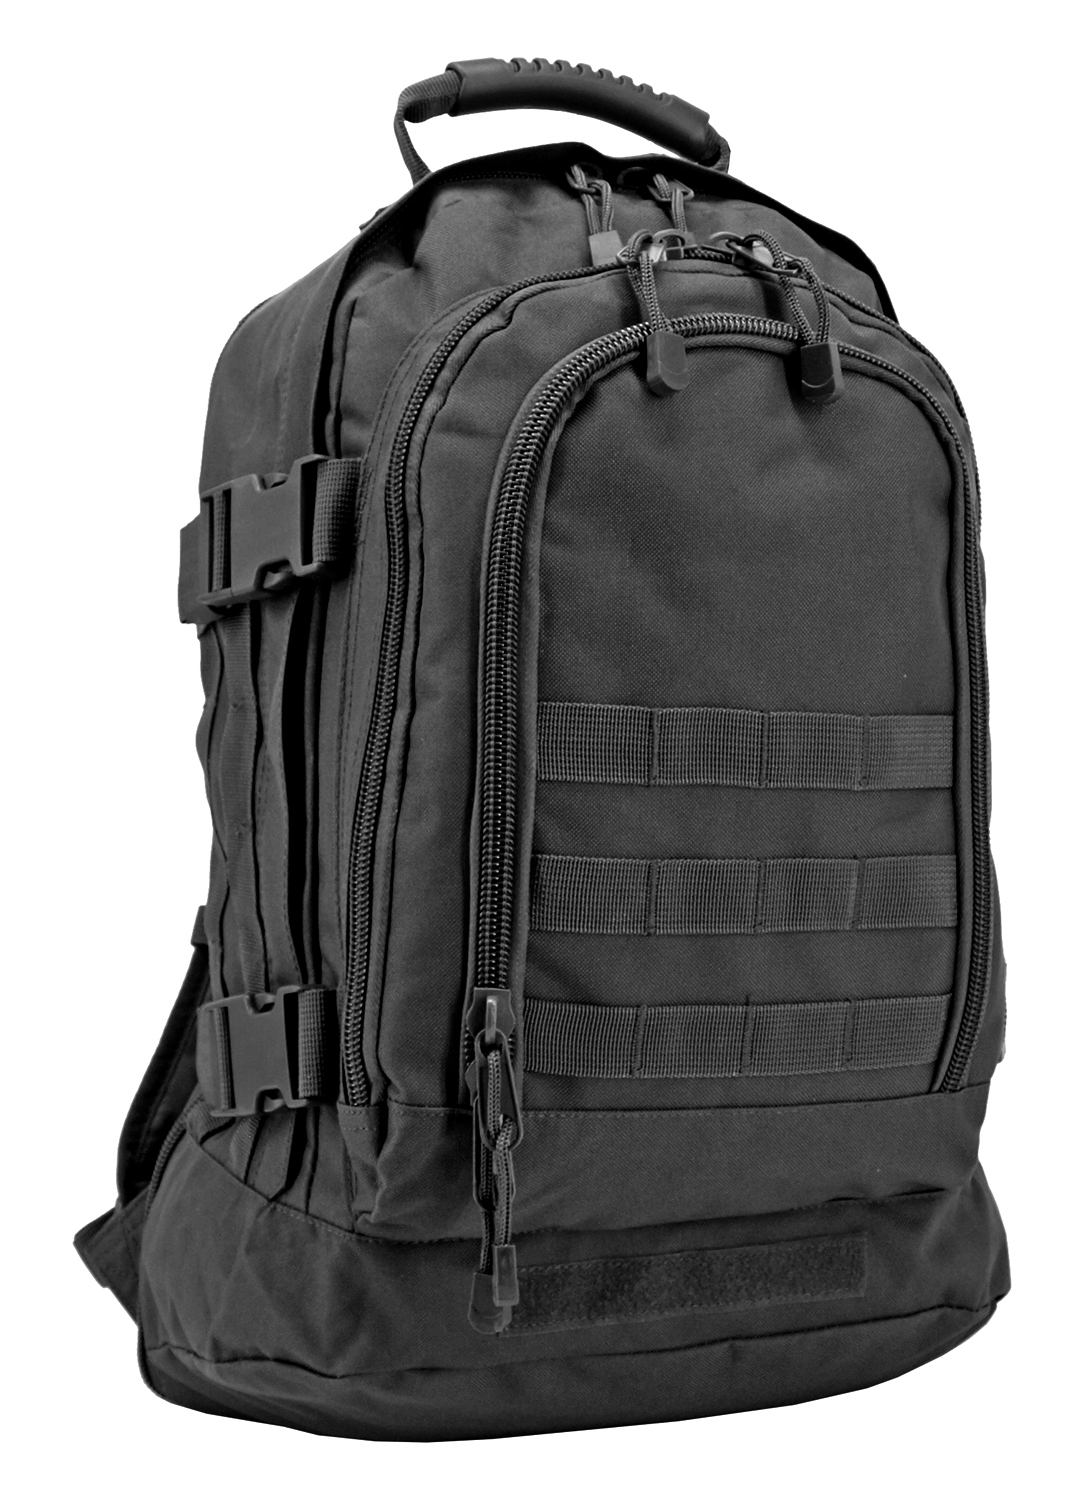 Expandable Tactical Backpack - Black